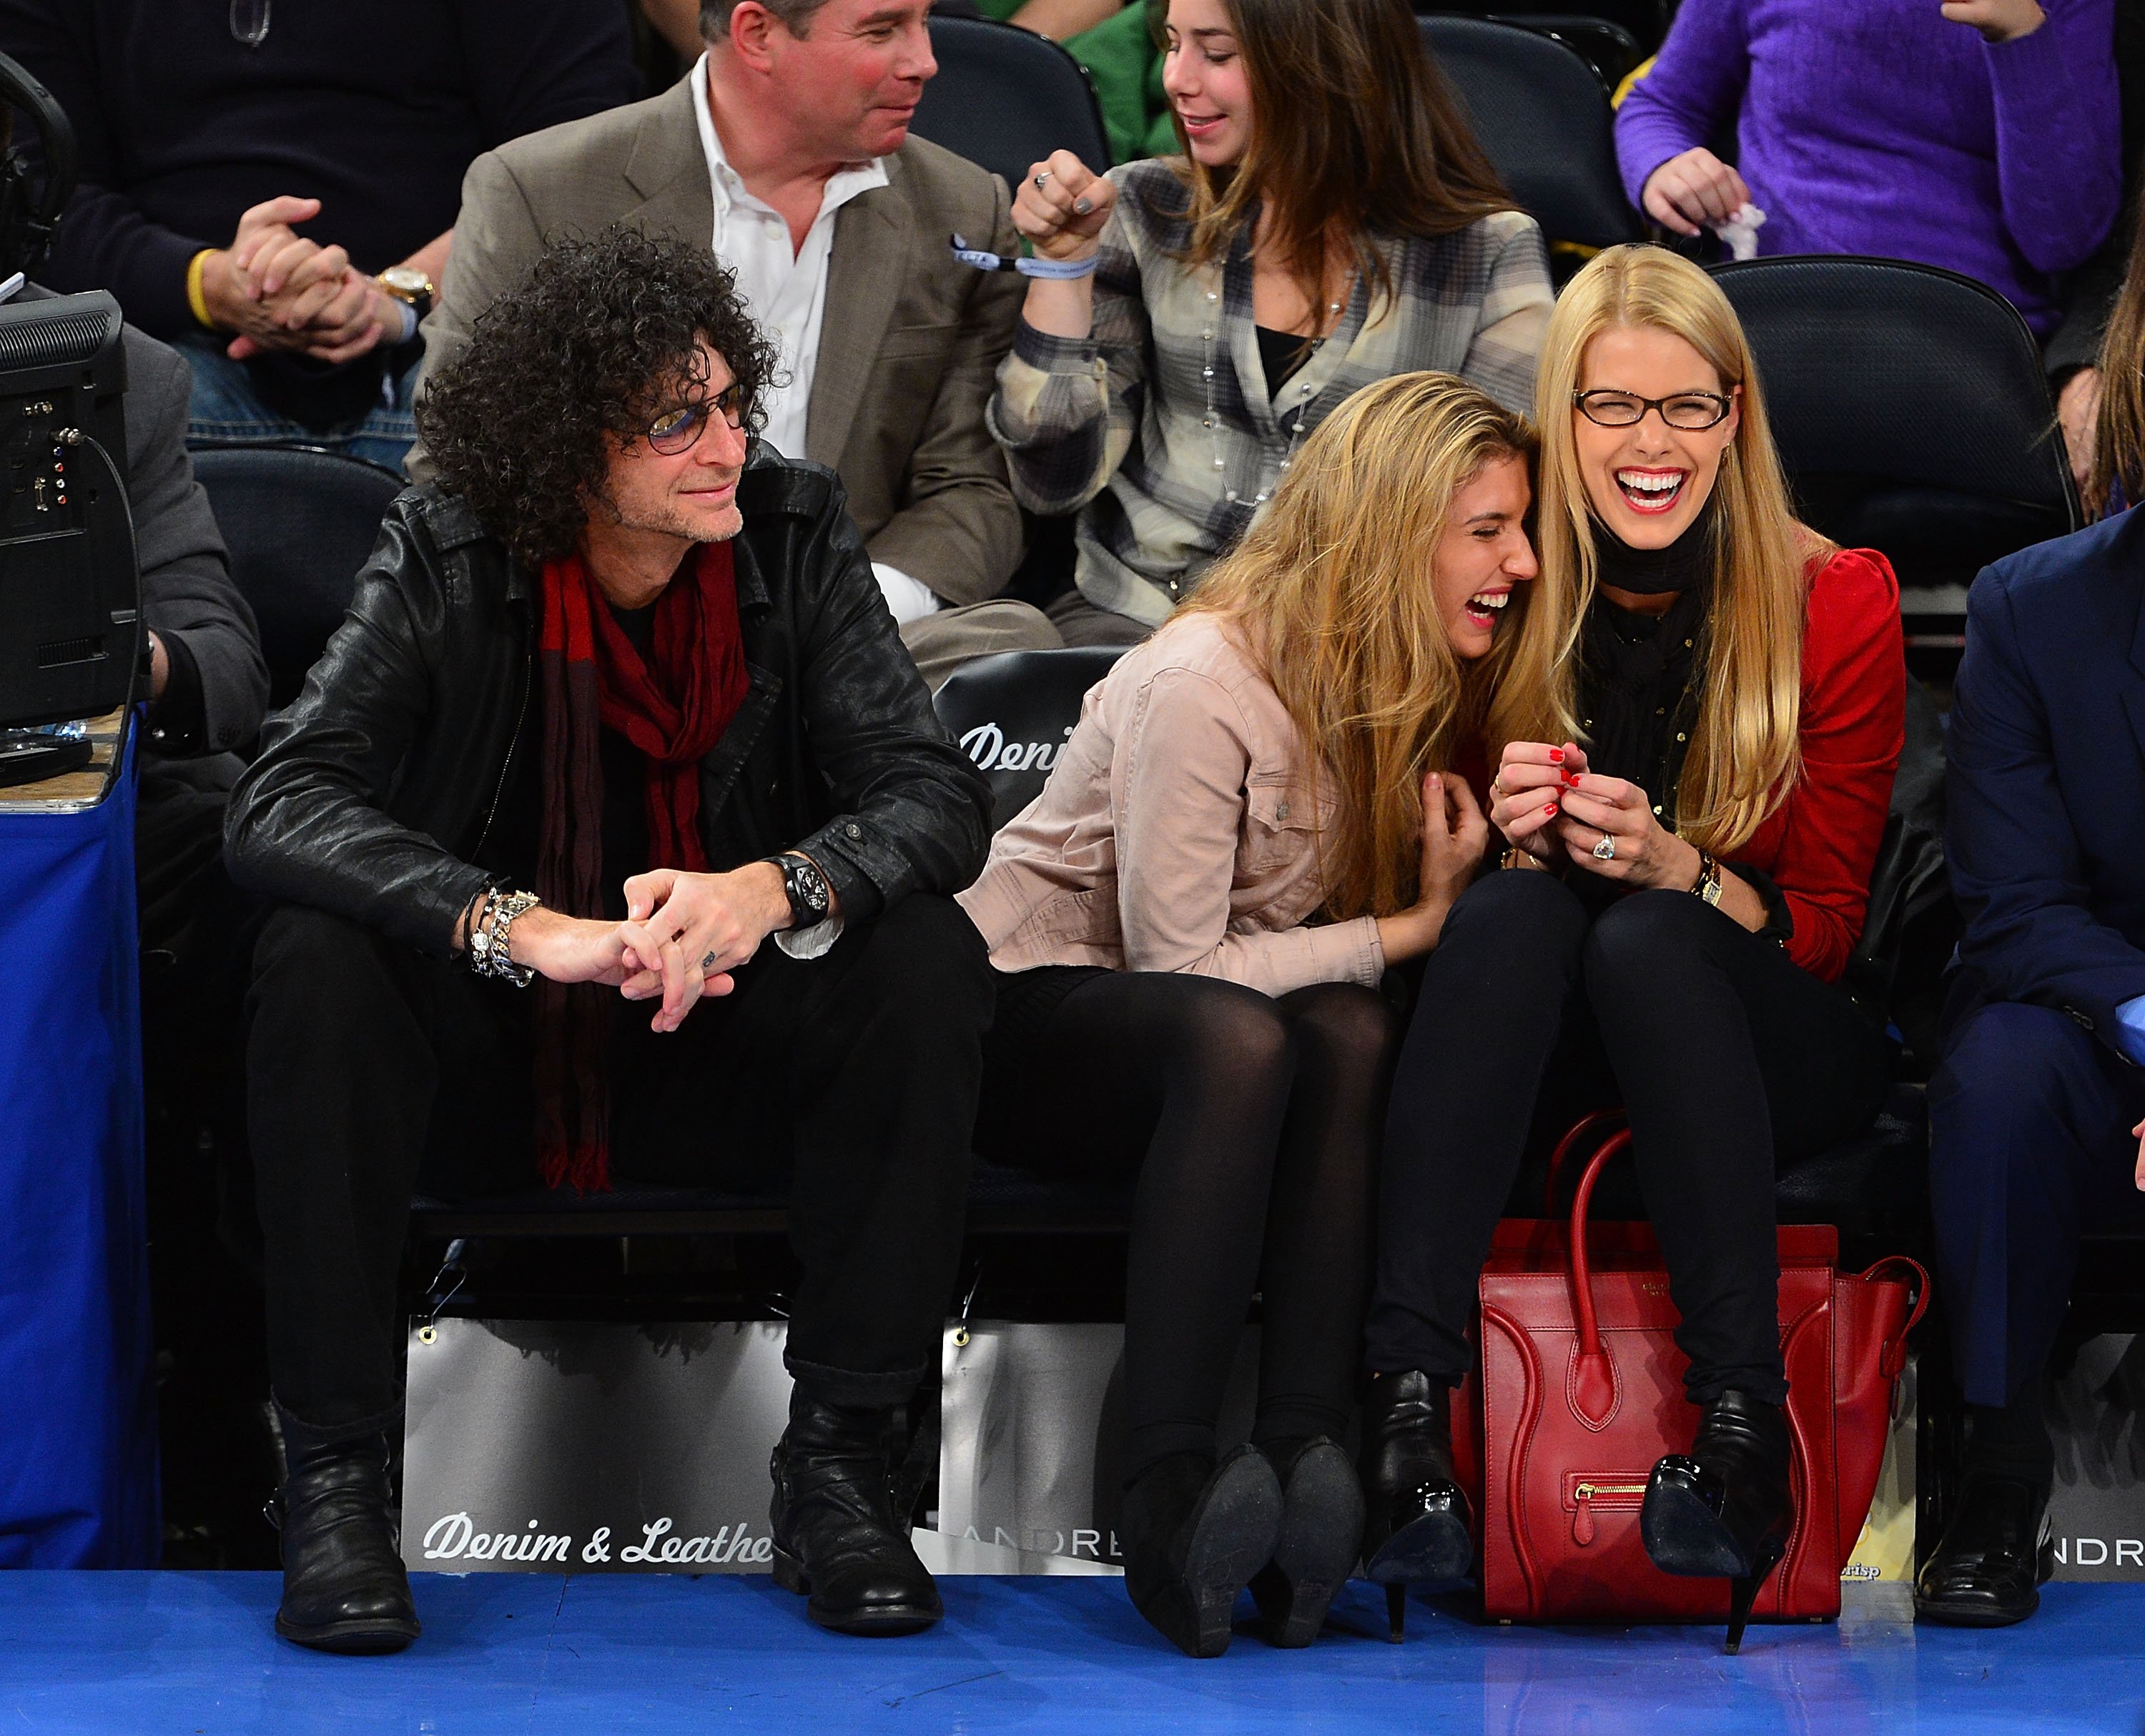 Howard Stern, Ashley Stern and Beth Ostrosky are photographed at the Orlando Magic vs New York Knicks game on January 30, 2013, in New York City | Source: Getty Images